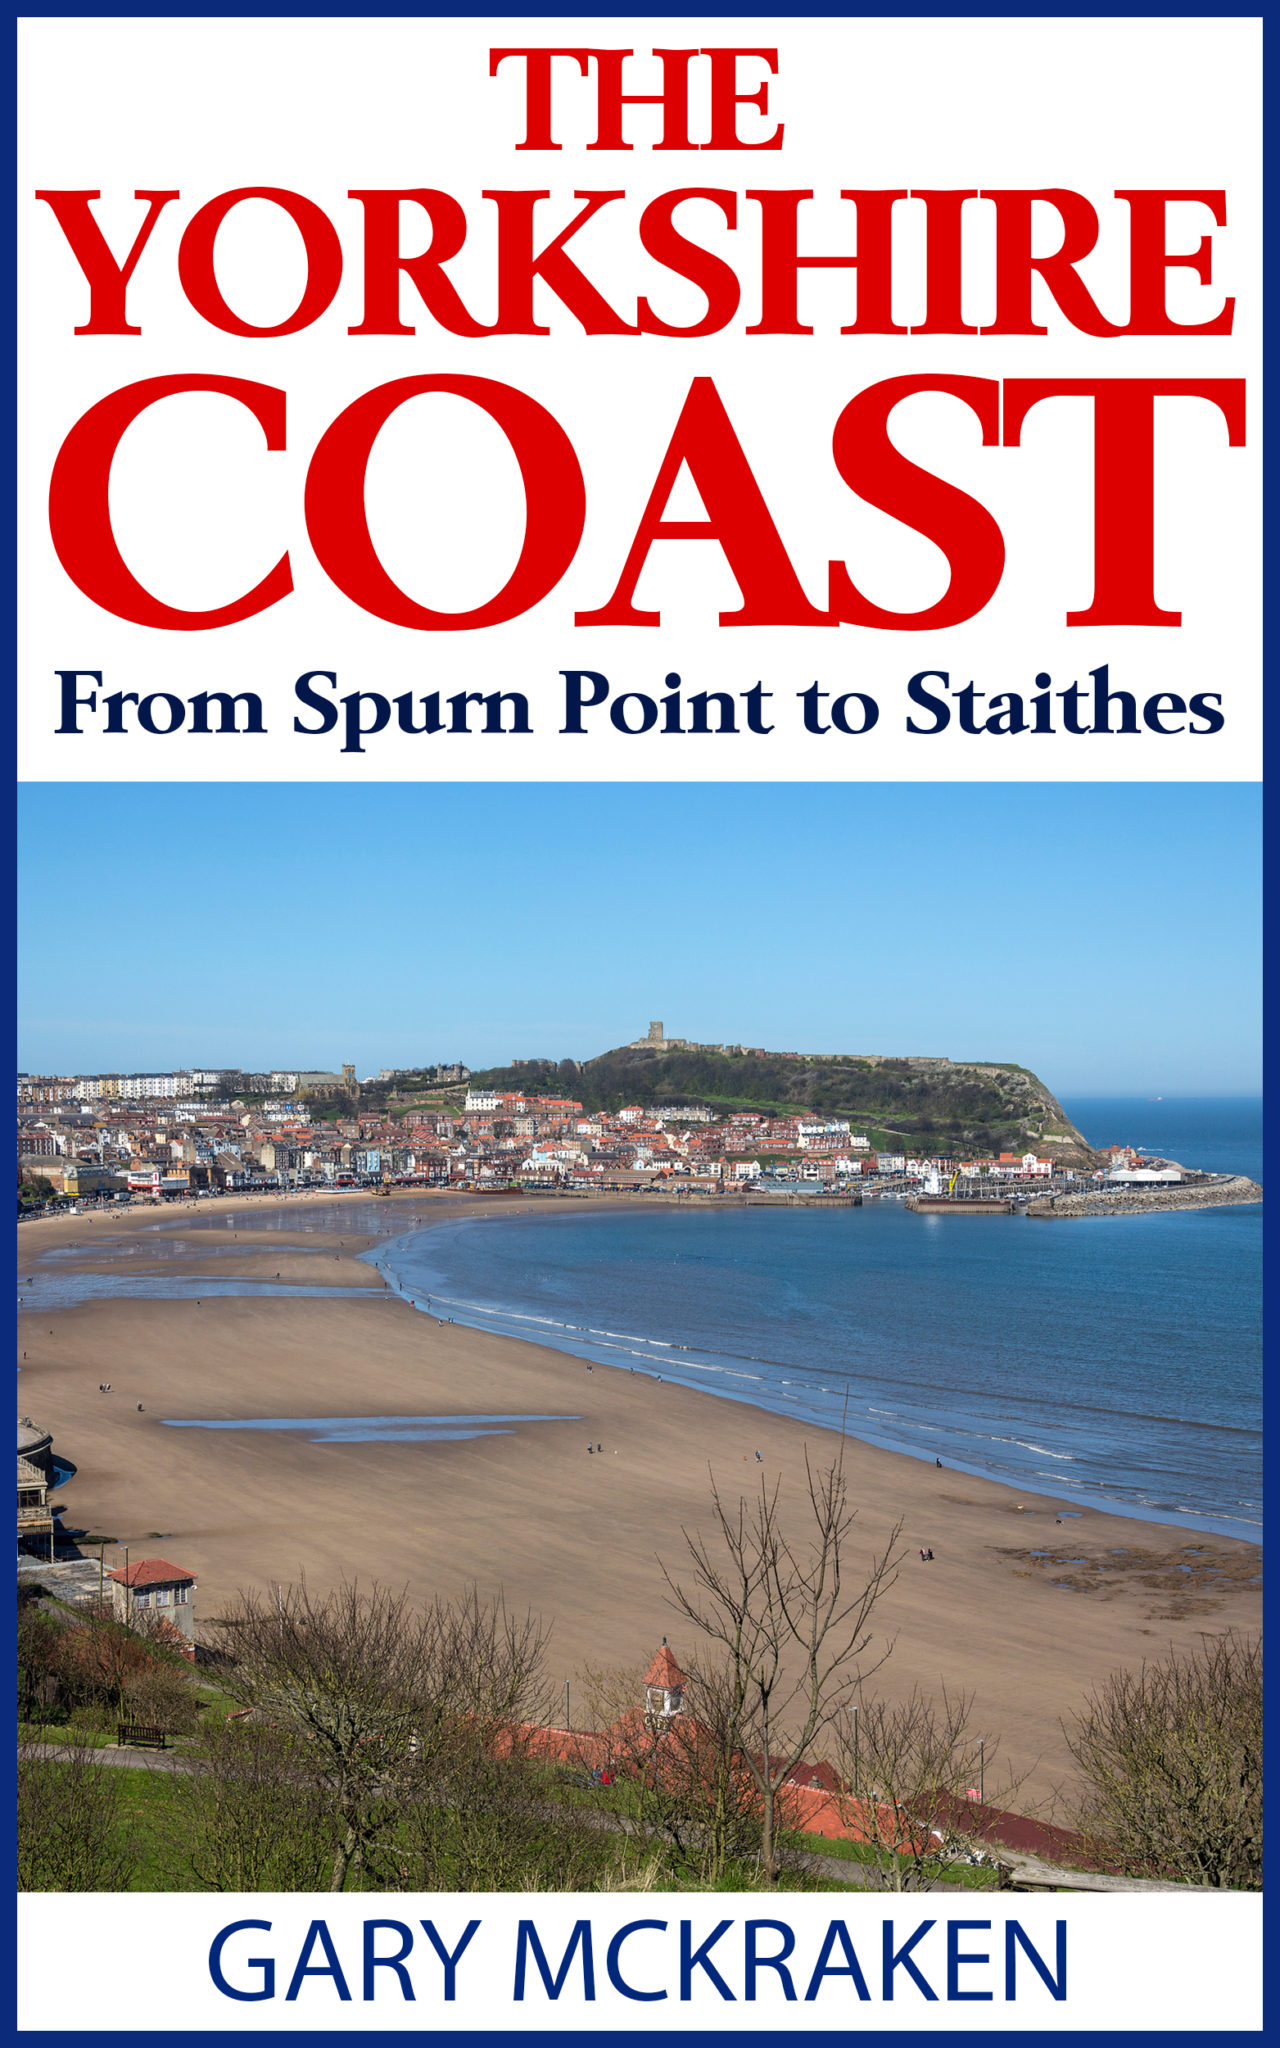 FREE: The Yorkshire Coast from Spurn Point to Staithes by Gary McKraken